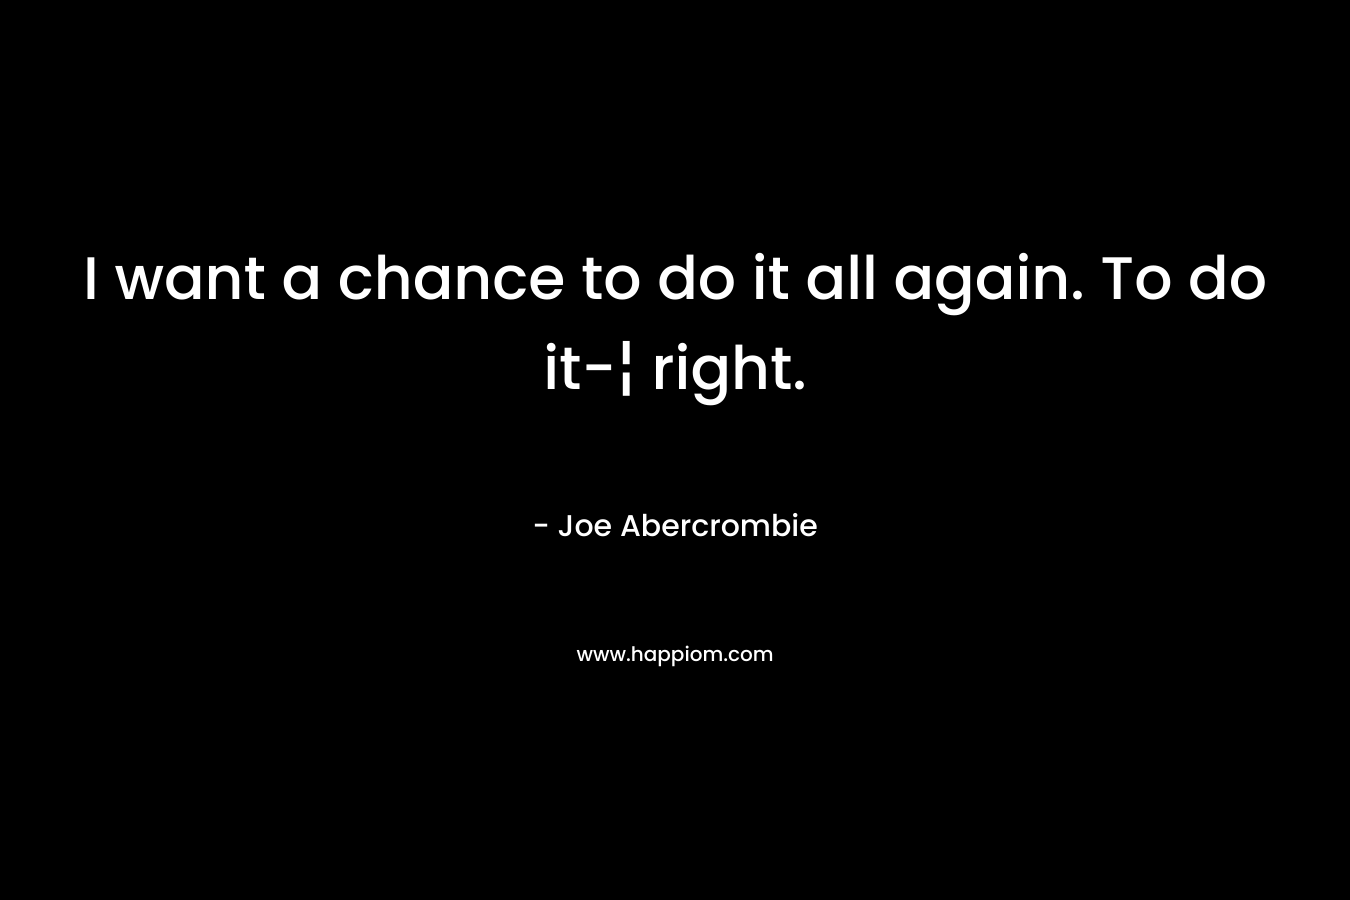 I want a chance to do it all again. To do it-¦ right. – Joe Abercrombie